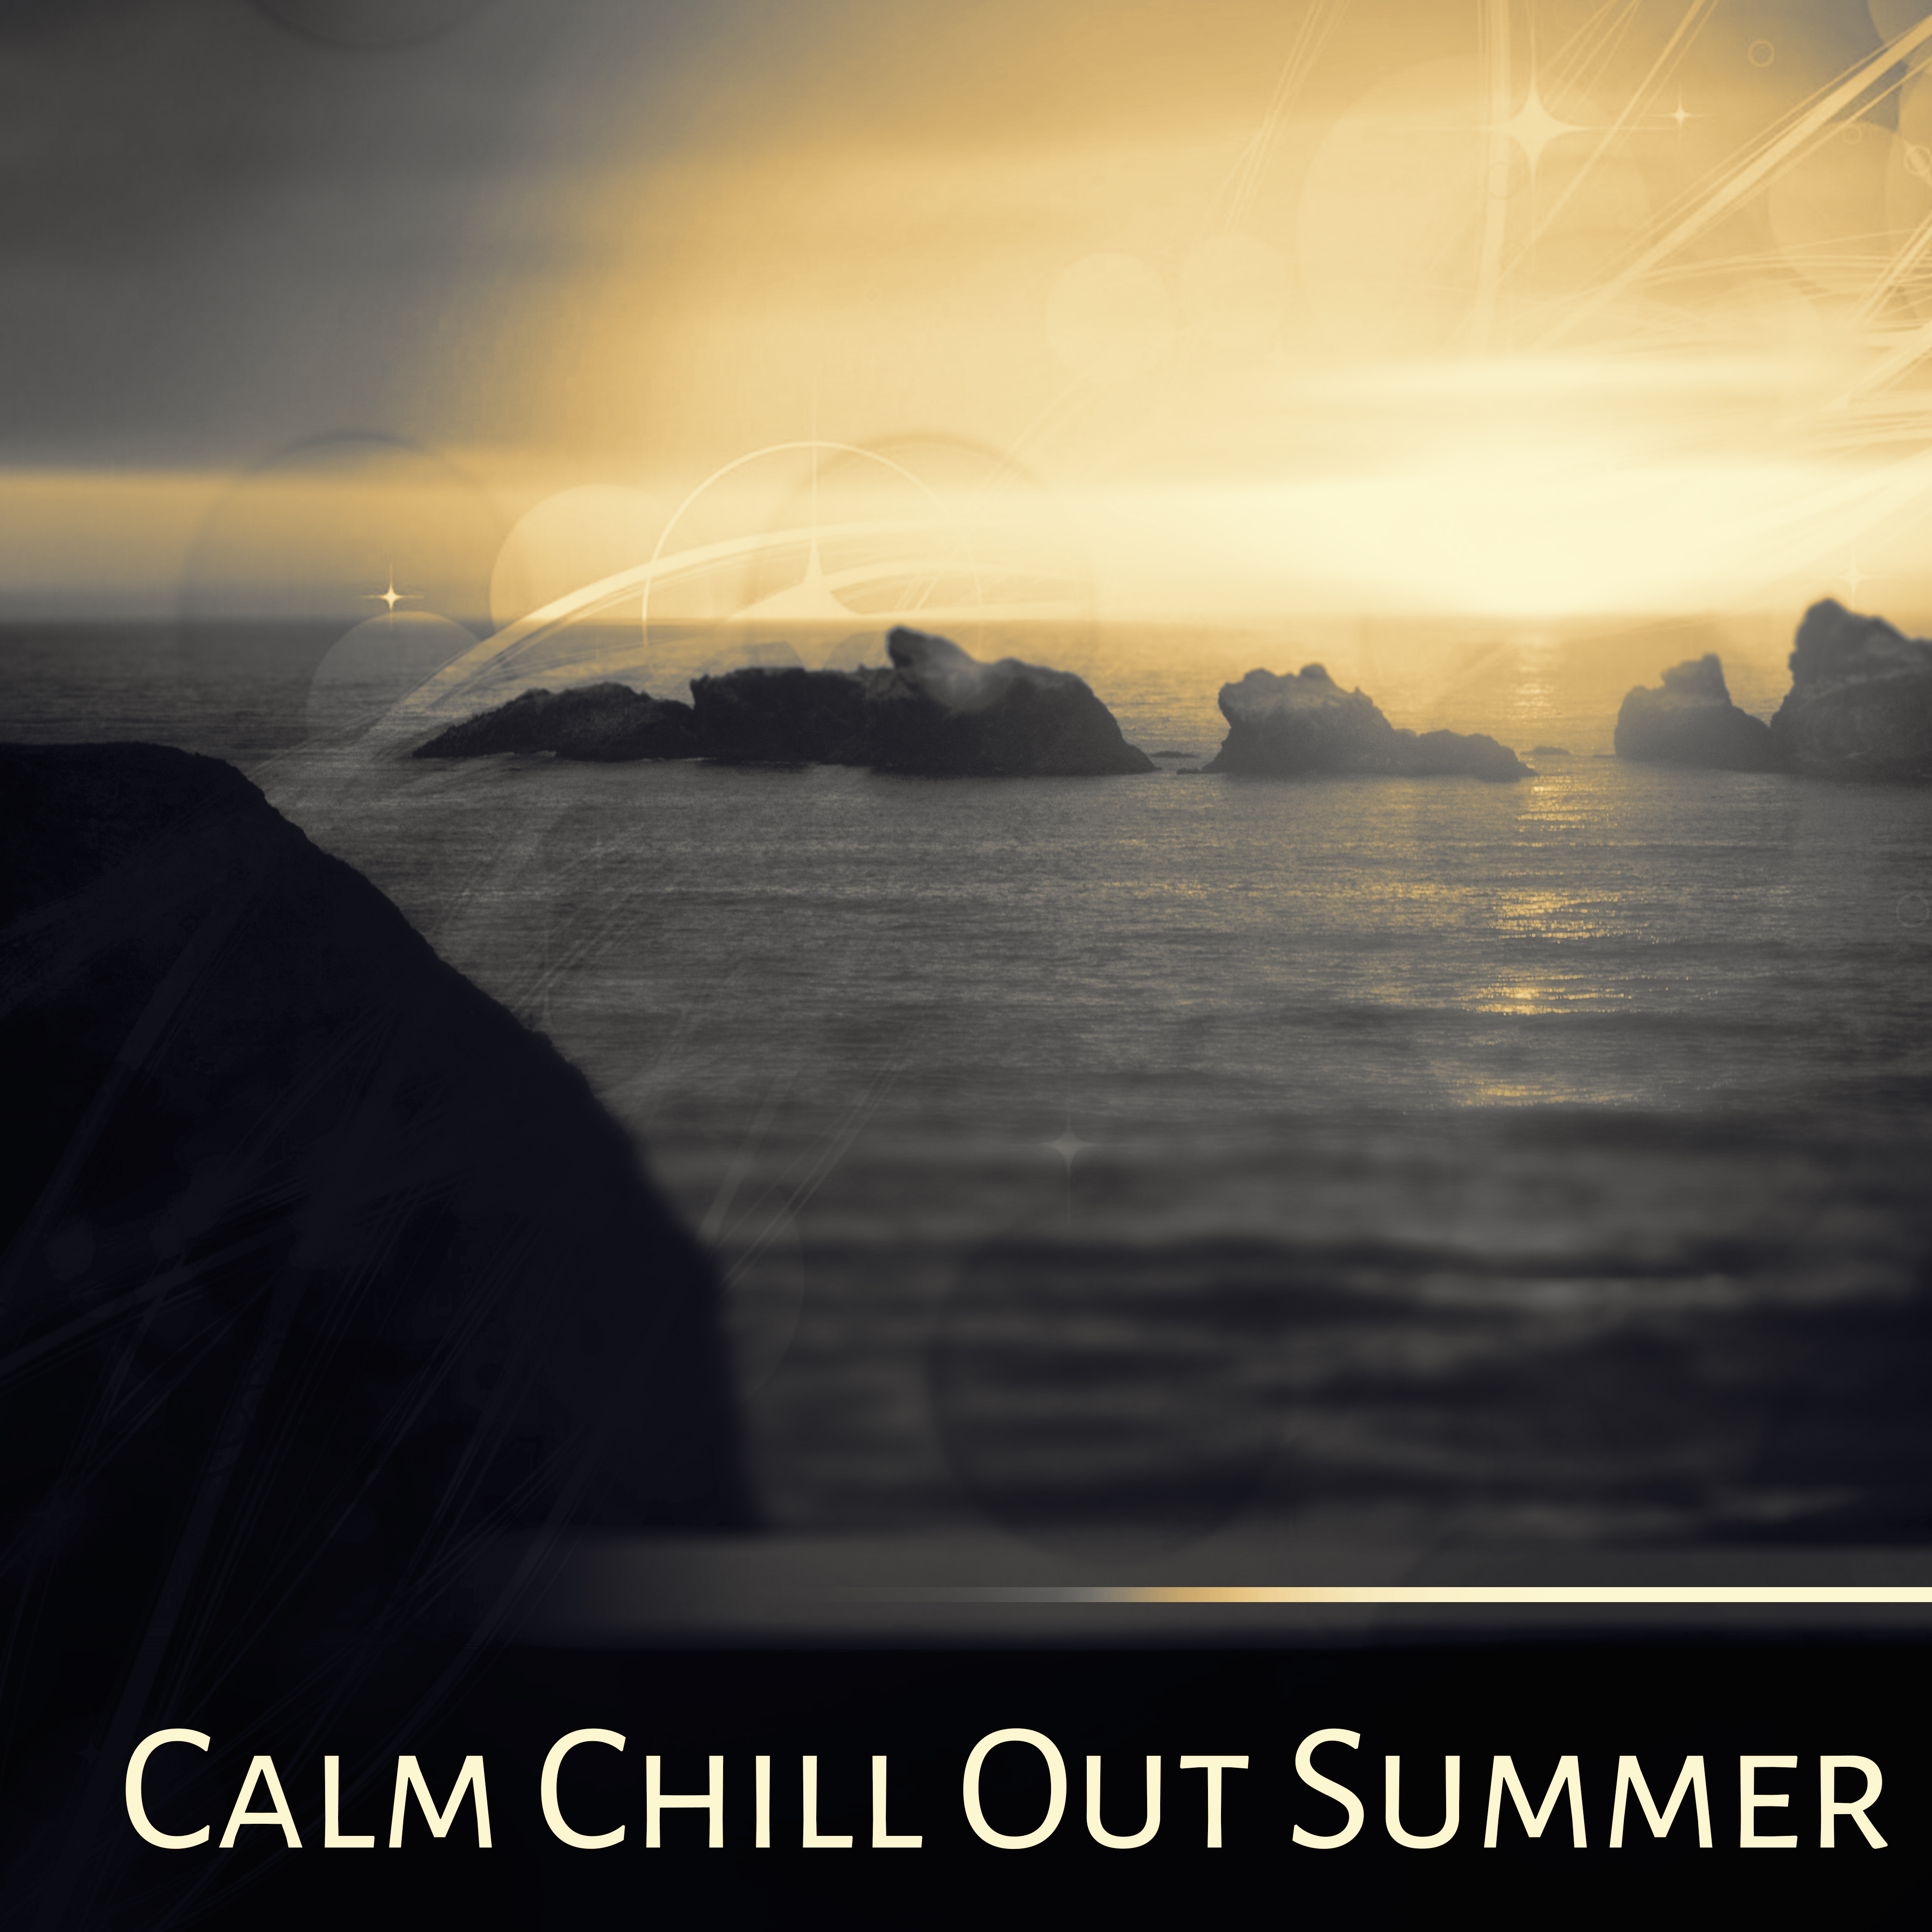 Calm Chill Out Summer – Relaxing Ibiza Music, Sounds to Calm Down, Summer Vibes, Hotel Lounge